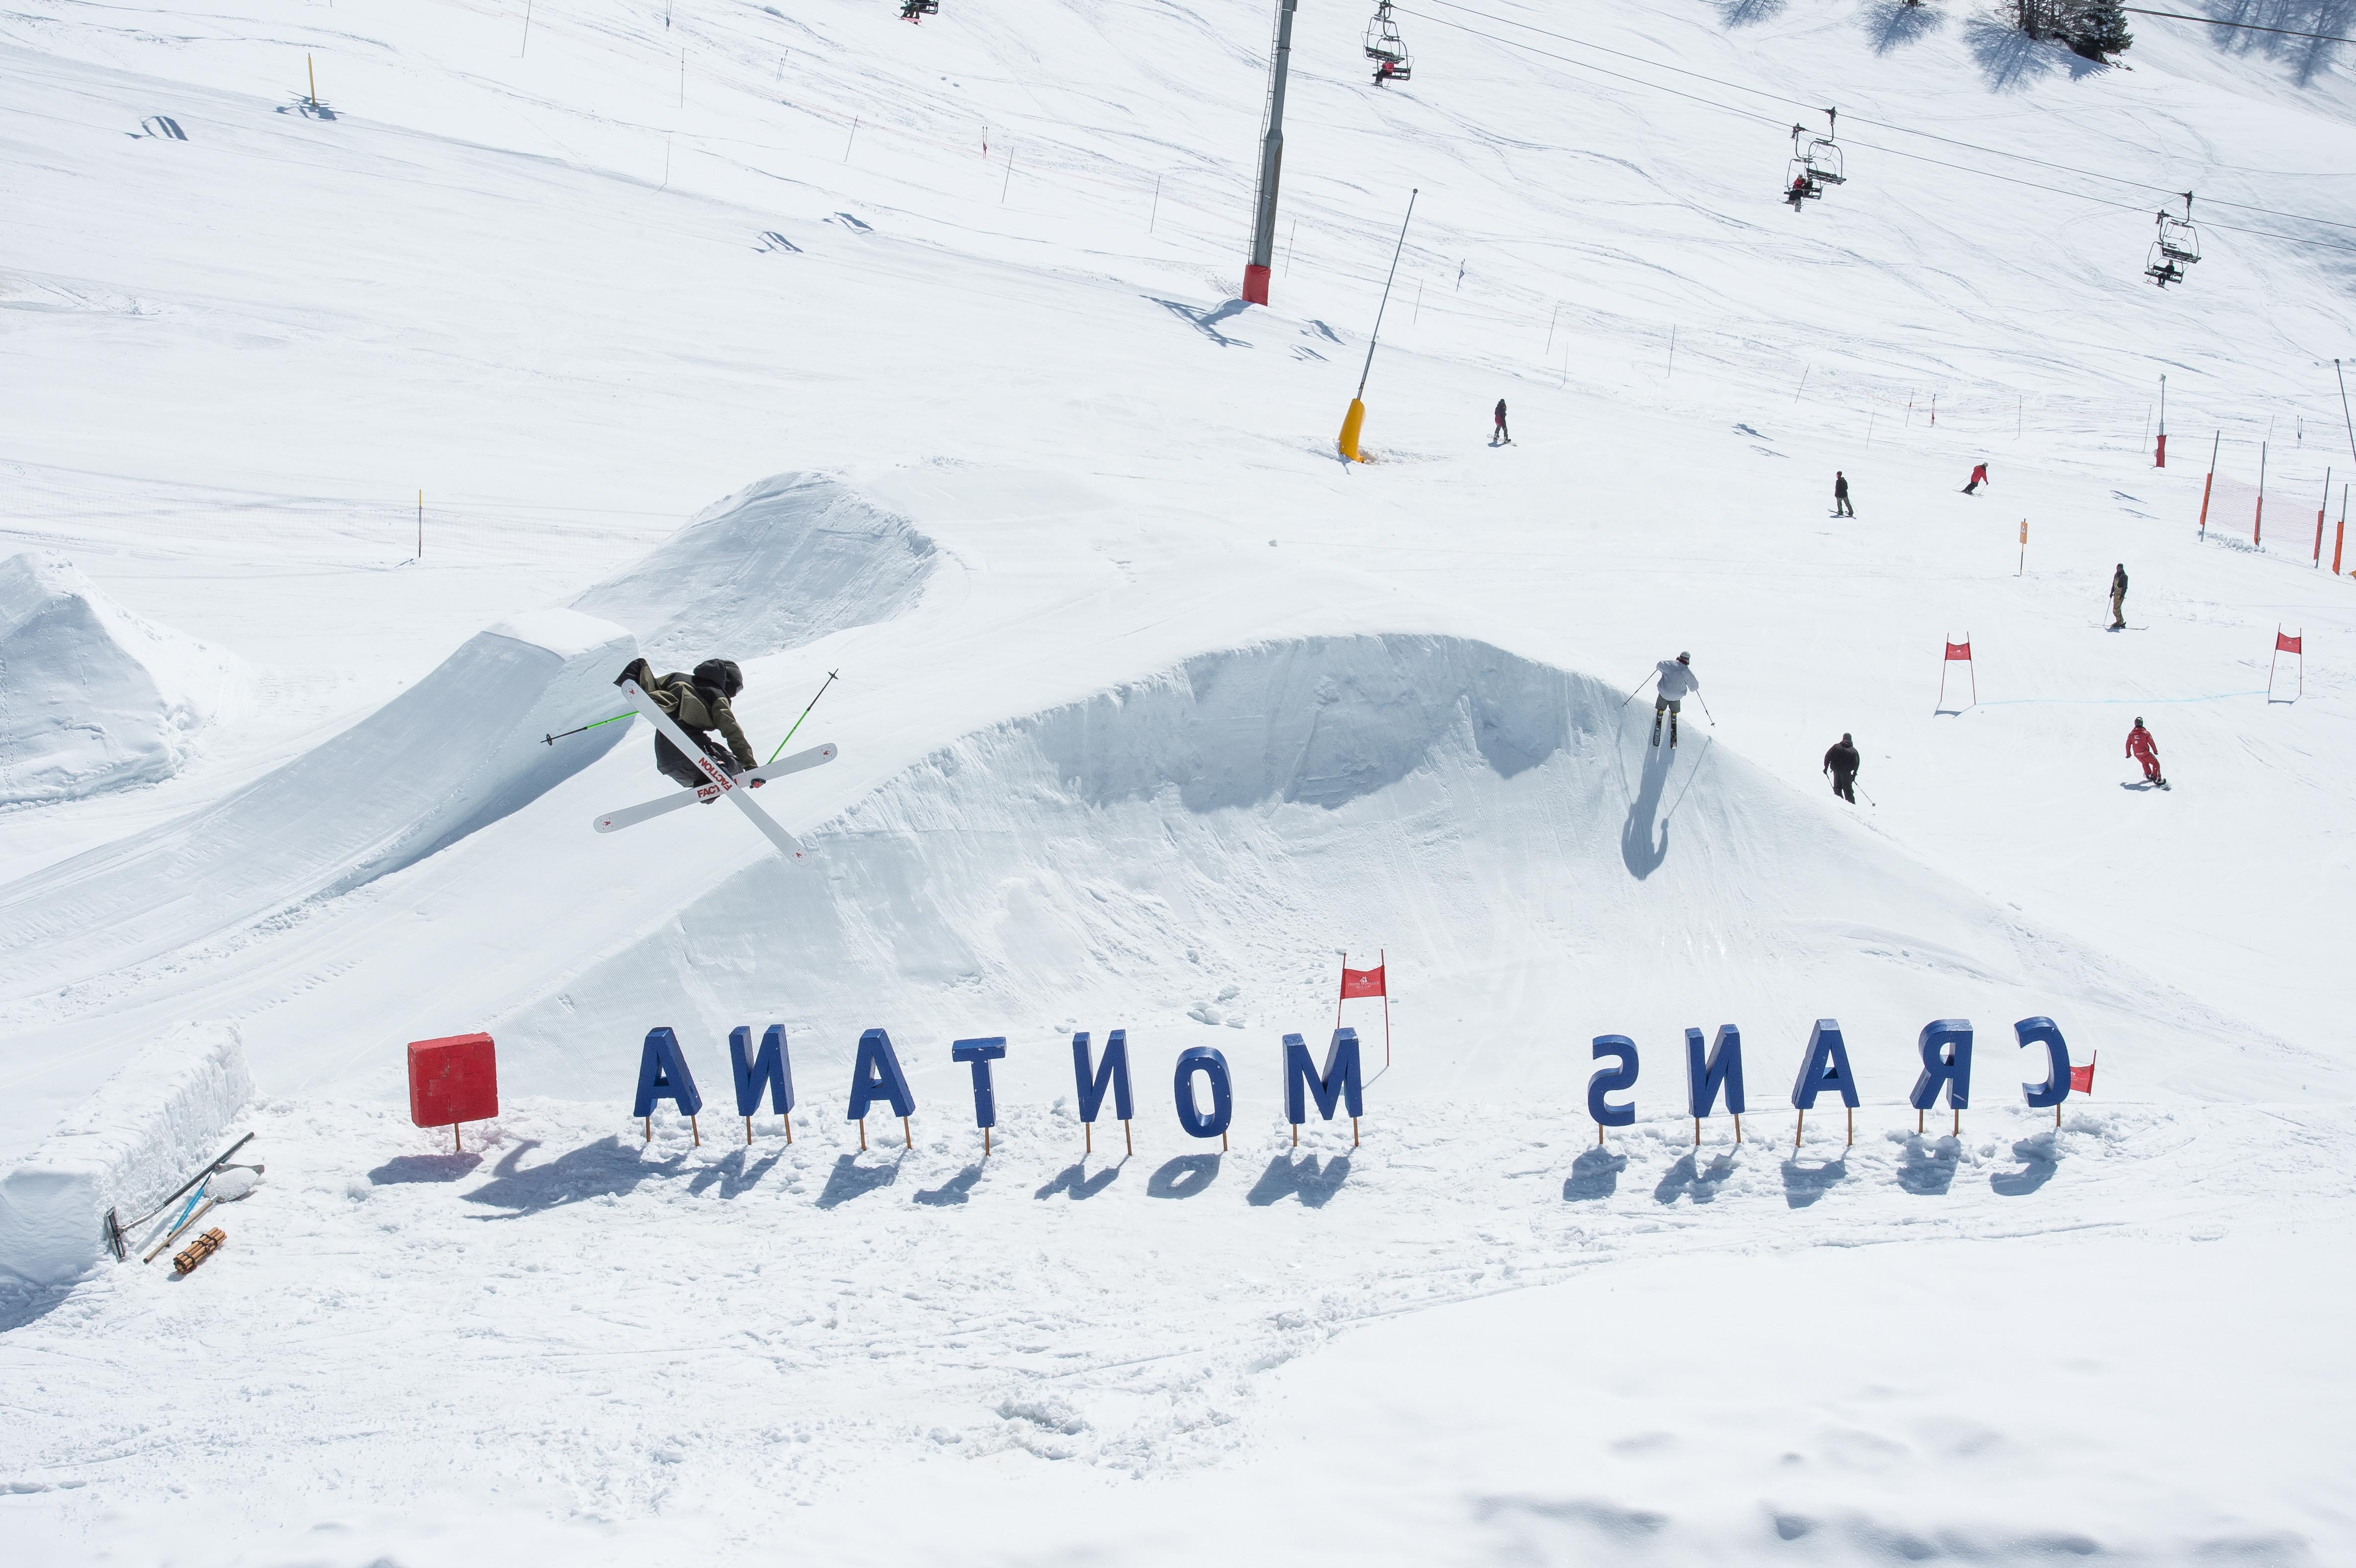 Open this weekend for snow-sports., Crans Montana